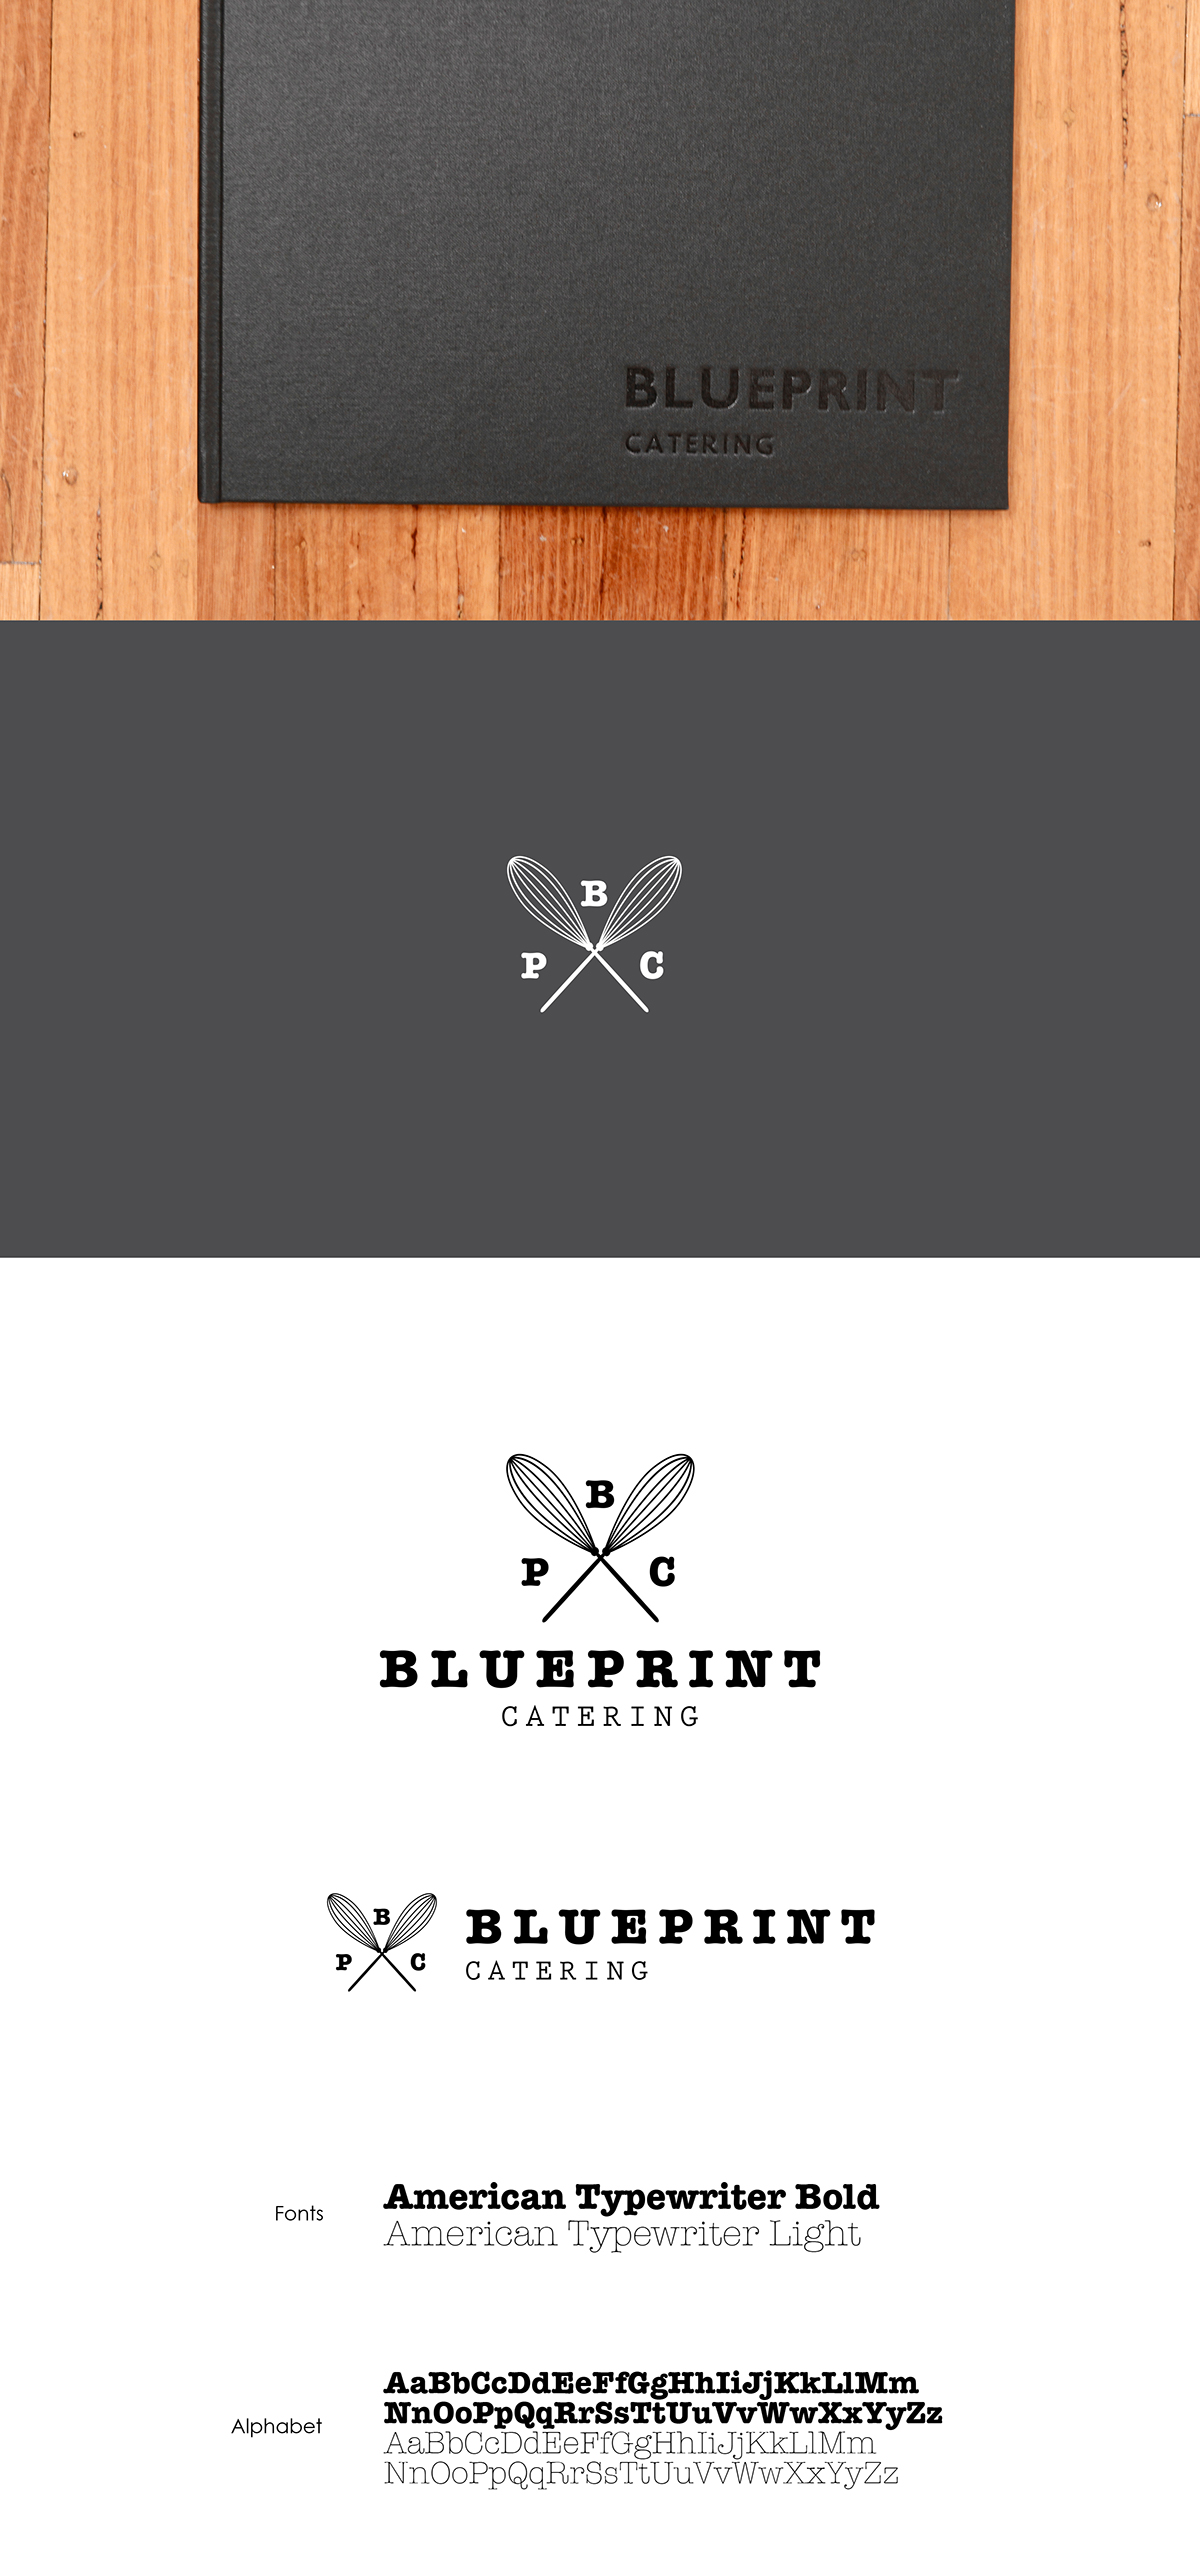 catering Blueprint blueprintcatering redesign